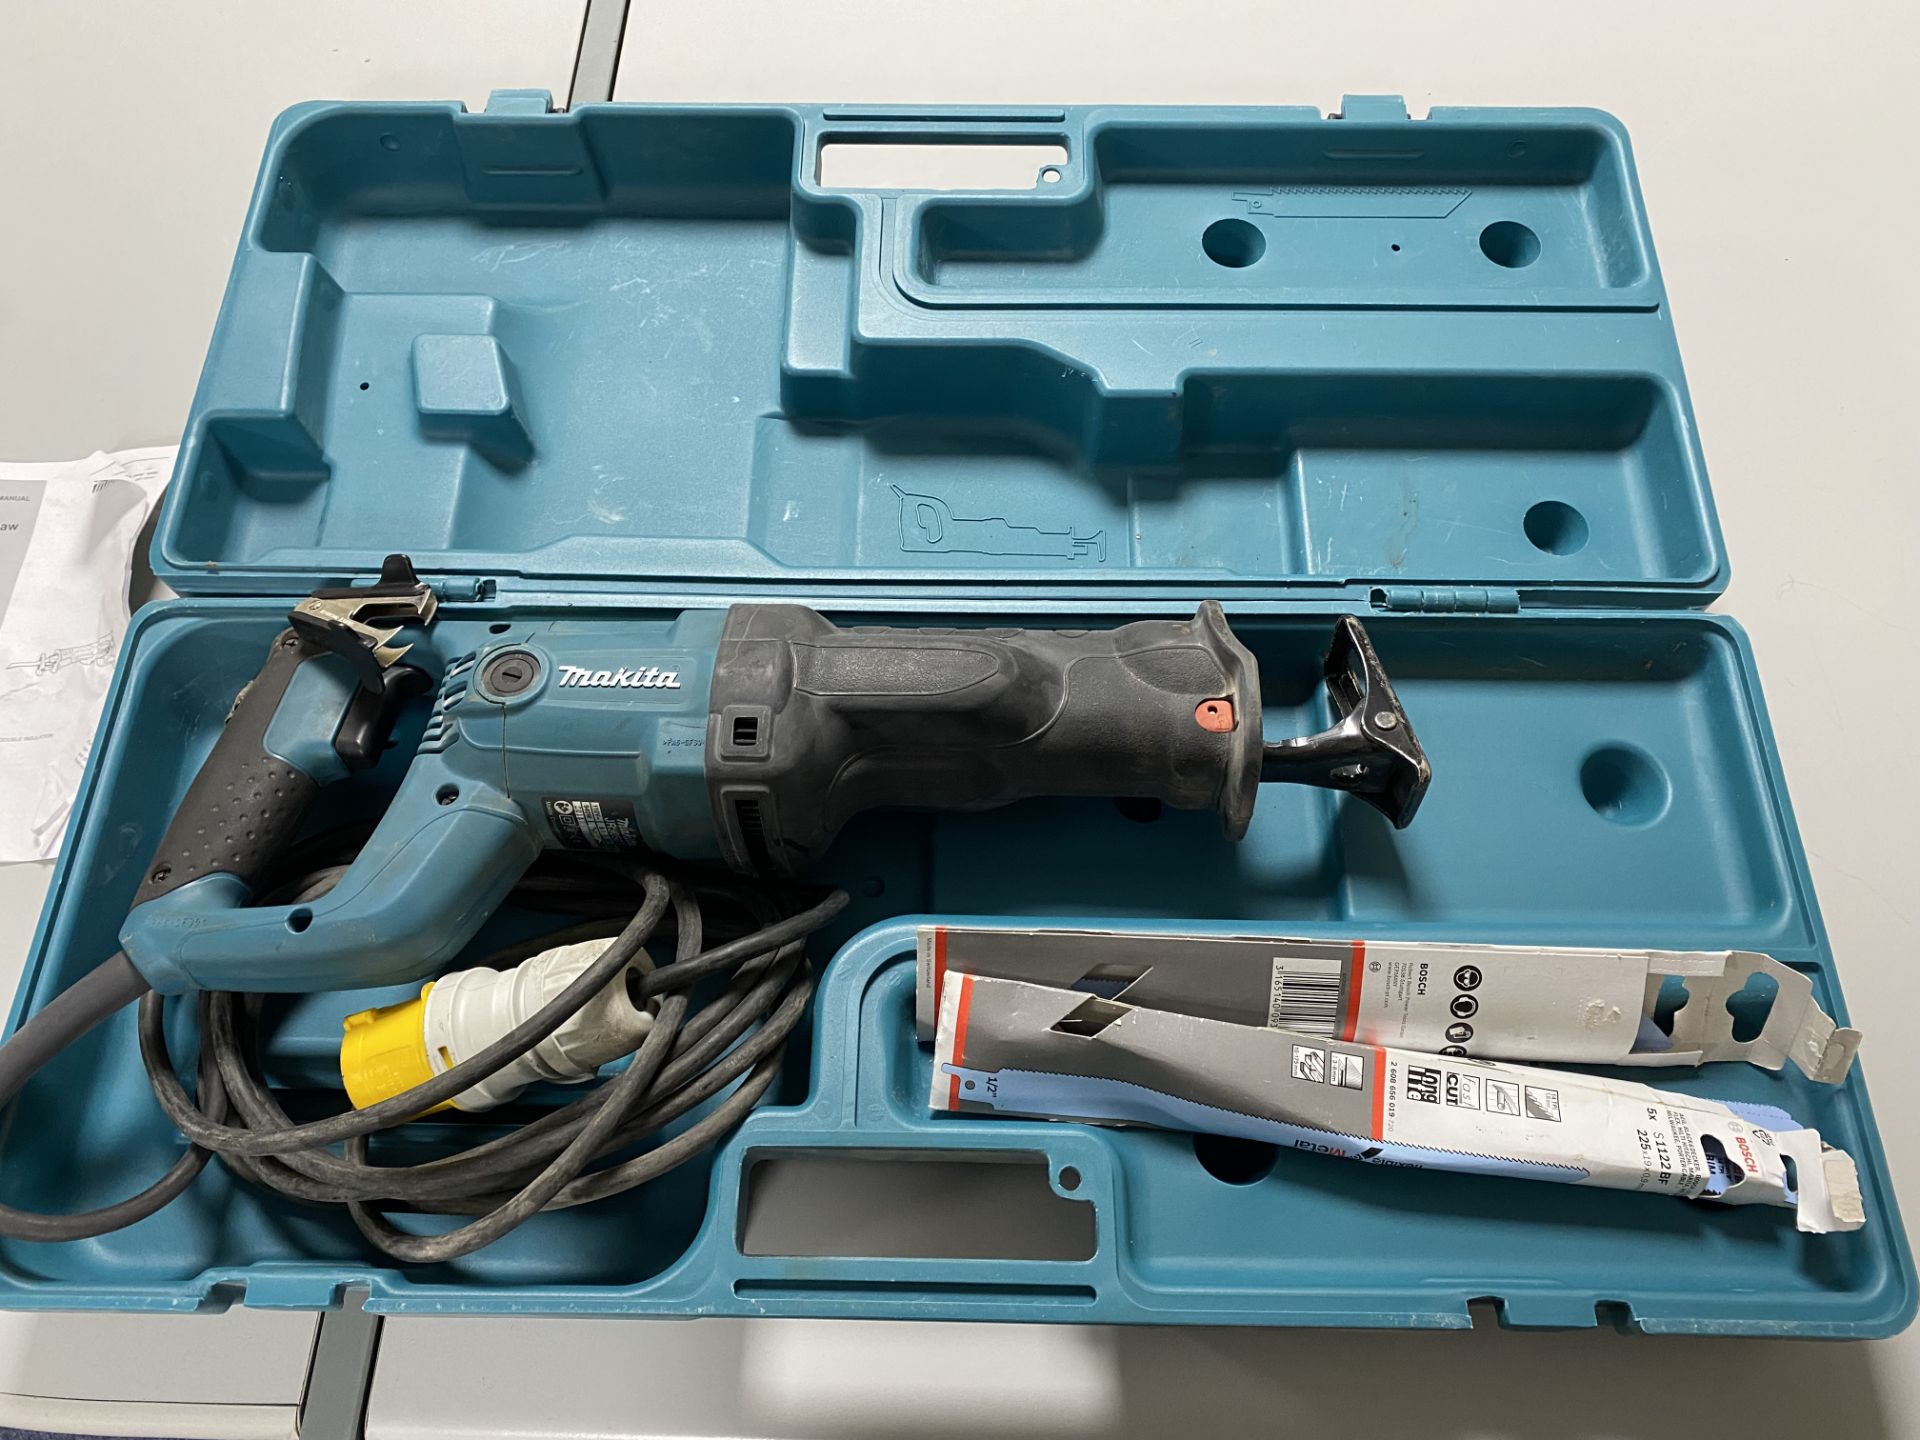 Makita JR3050T 110v Reciprocating Saw with assorted blades and Carry Case as Shown